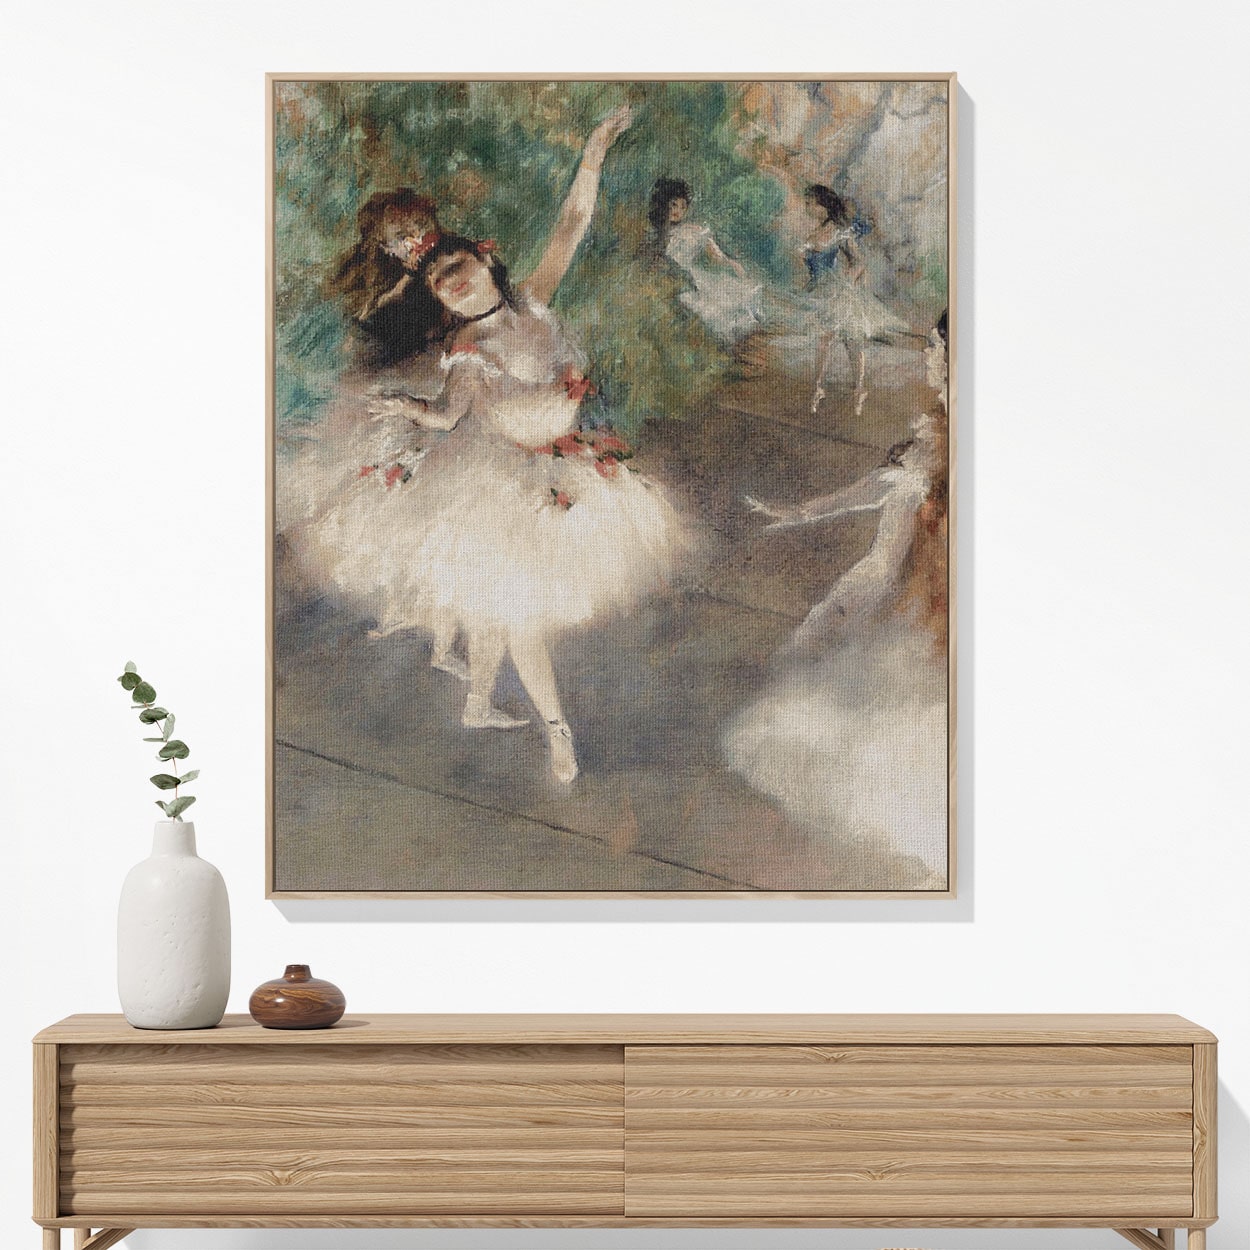 Ballerinas Woven Blanket Woven Blanket Hanging on a Wall as Framed Wall Art